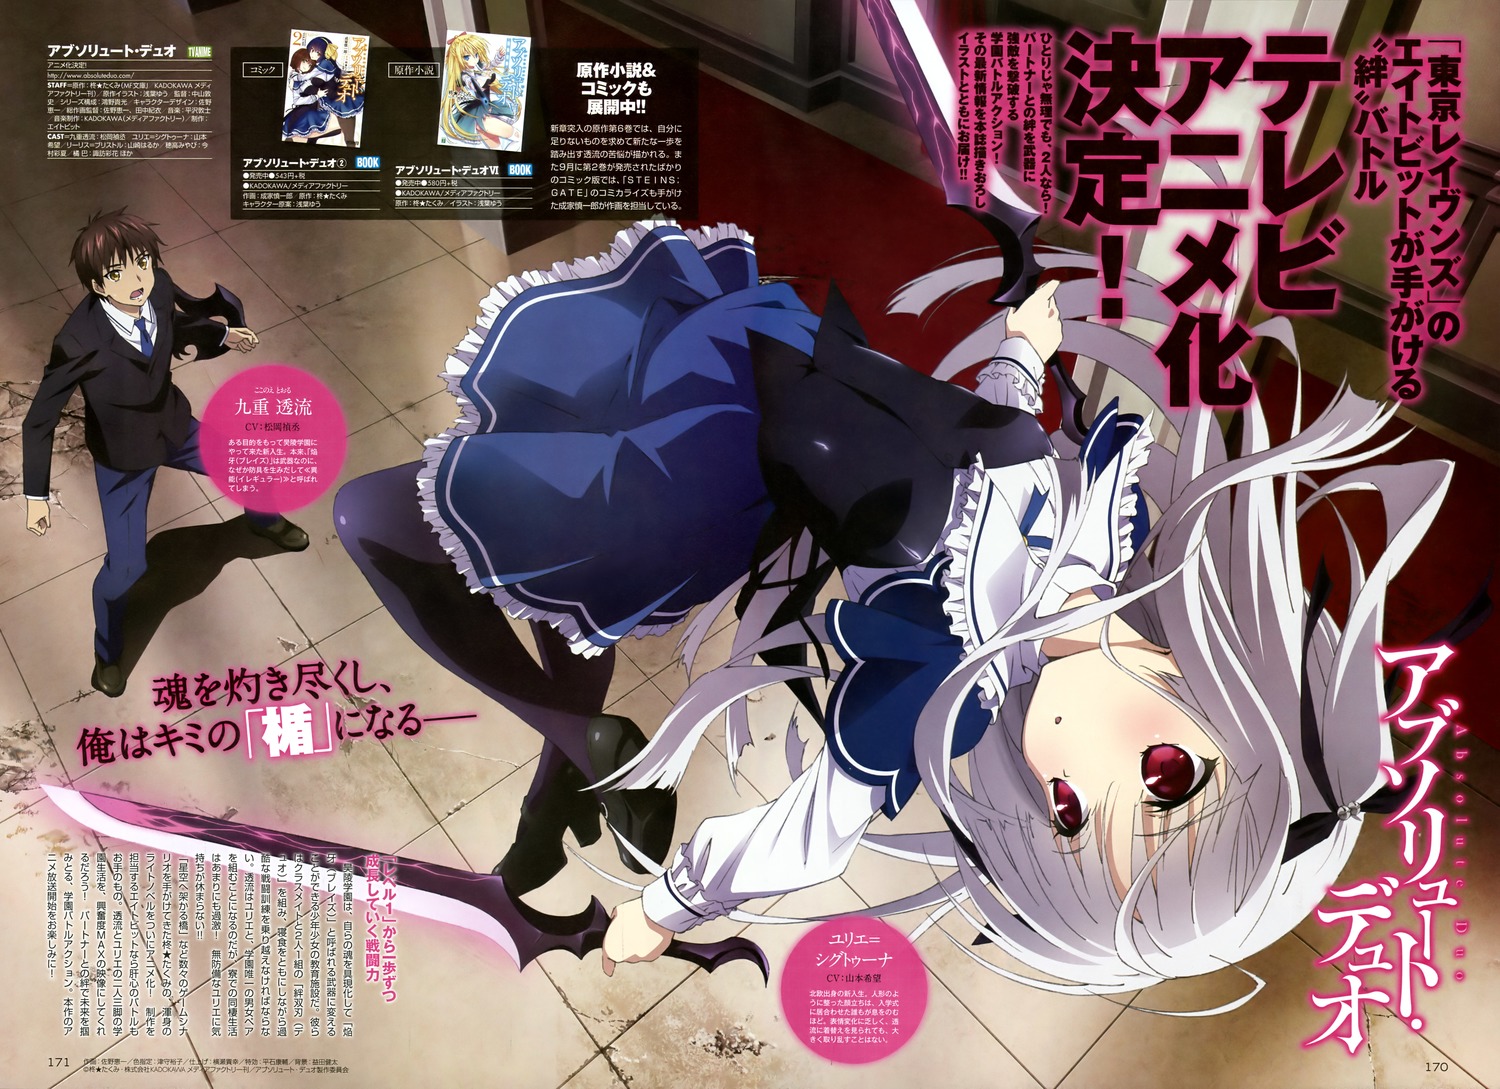 Buy Absolute Duo Graphic Novel Volume 2